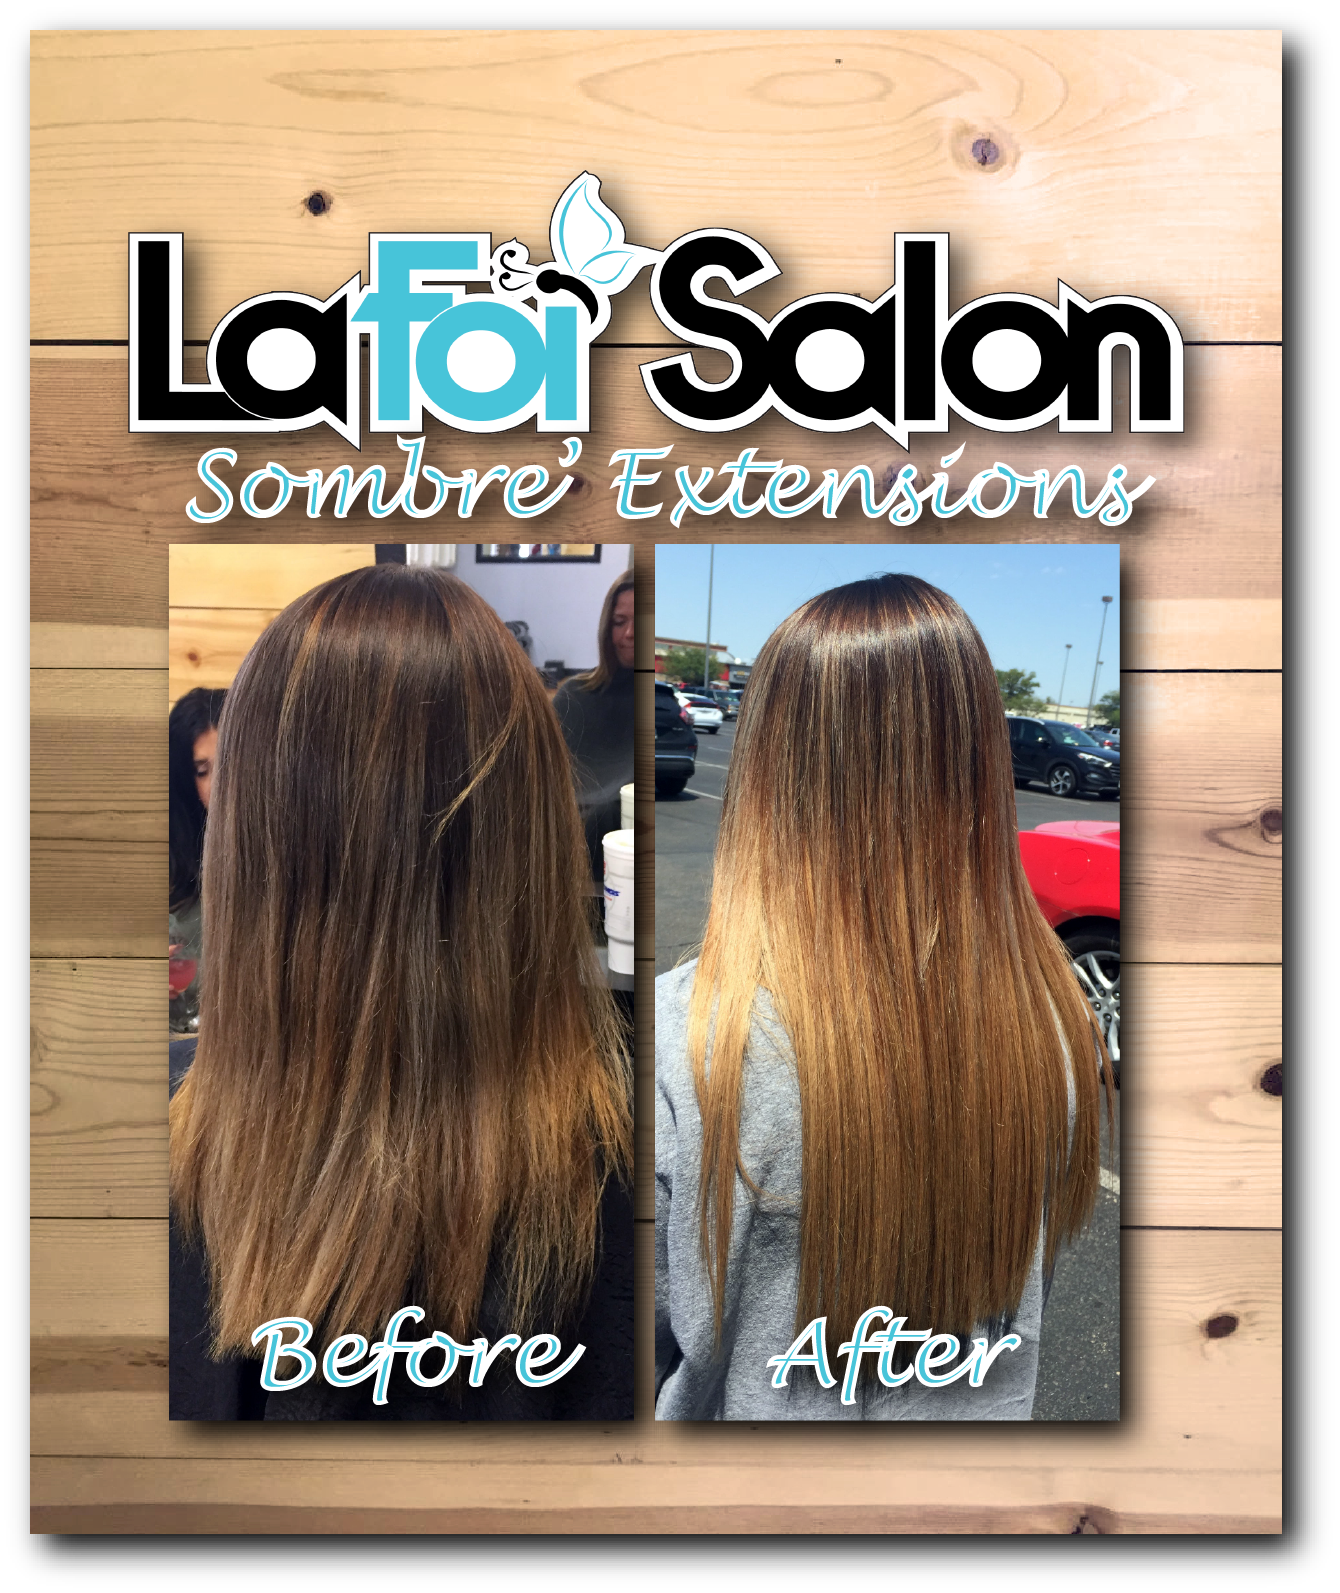 Soft.Natural.Elegant. Call Today To Get Yours!!! (806) 771-4545 www.lafoisalon.com